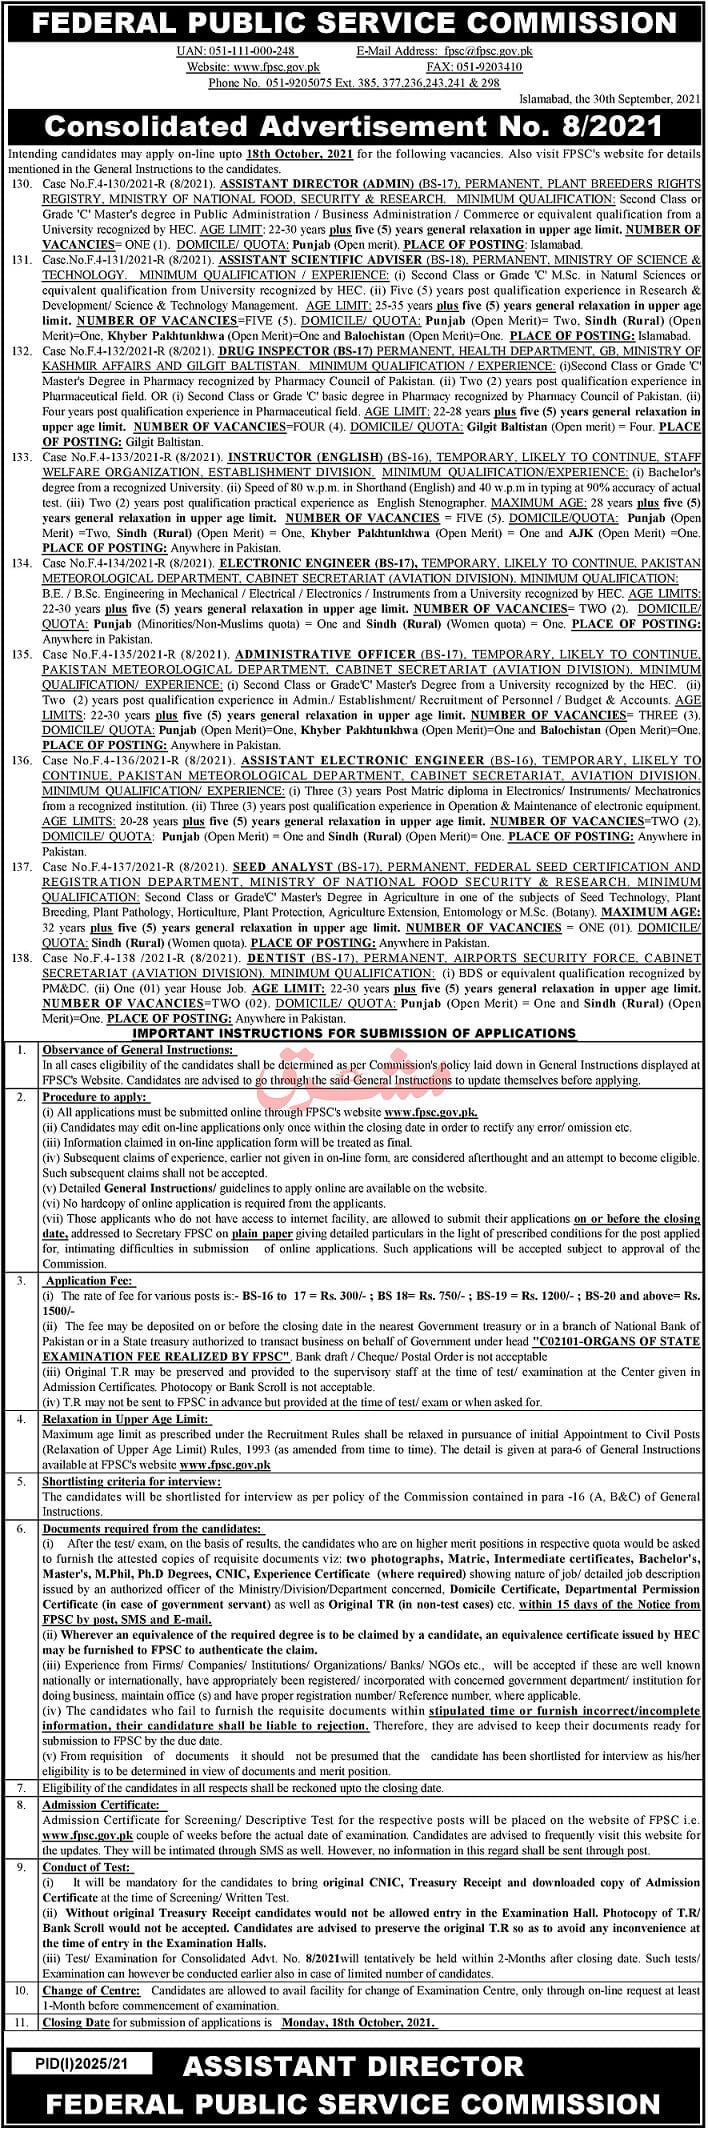 Federal Public Service Commission FPSC Jobs in Islamabad 2021